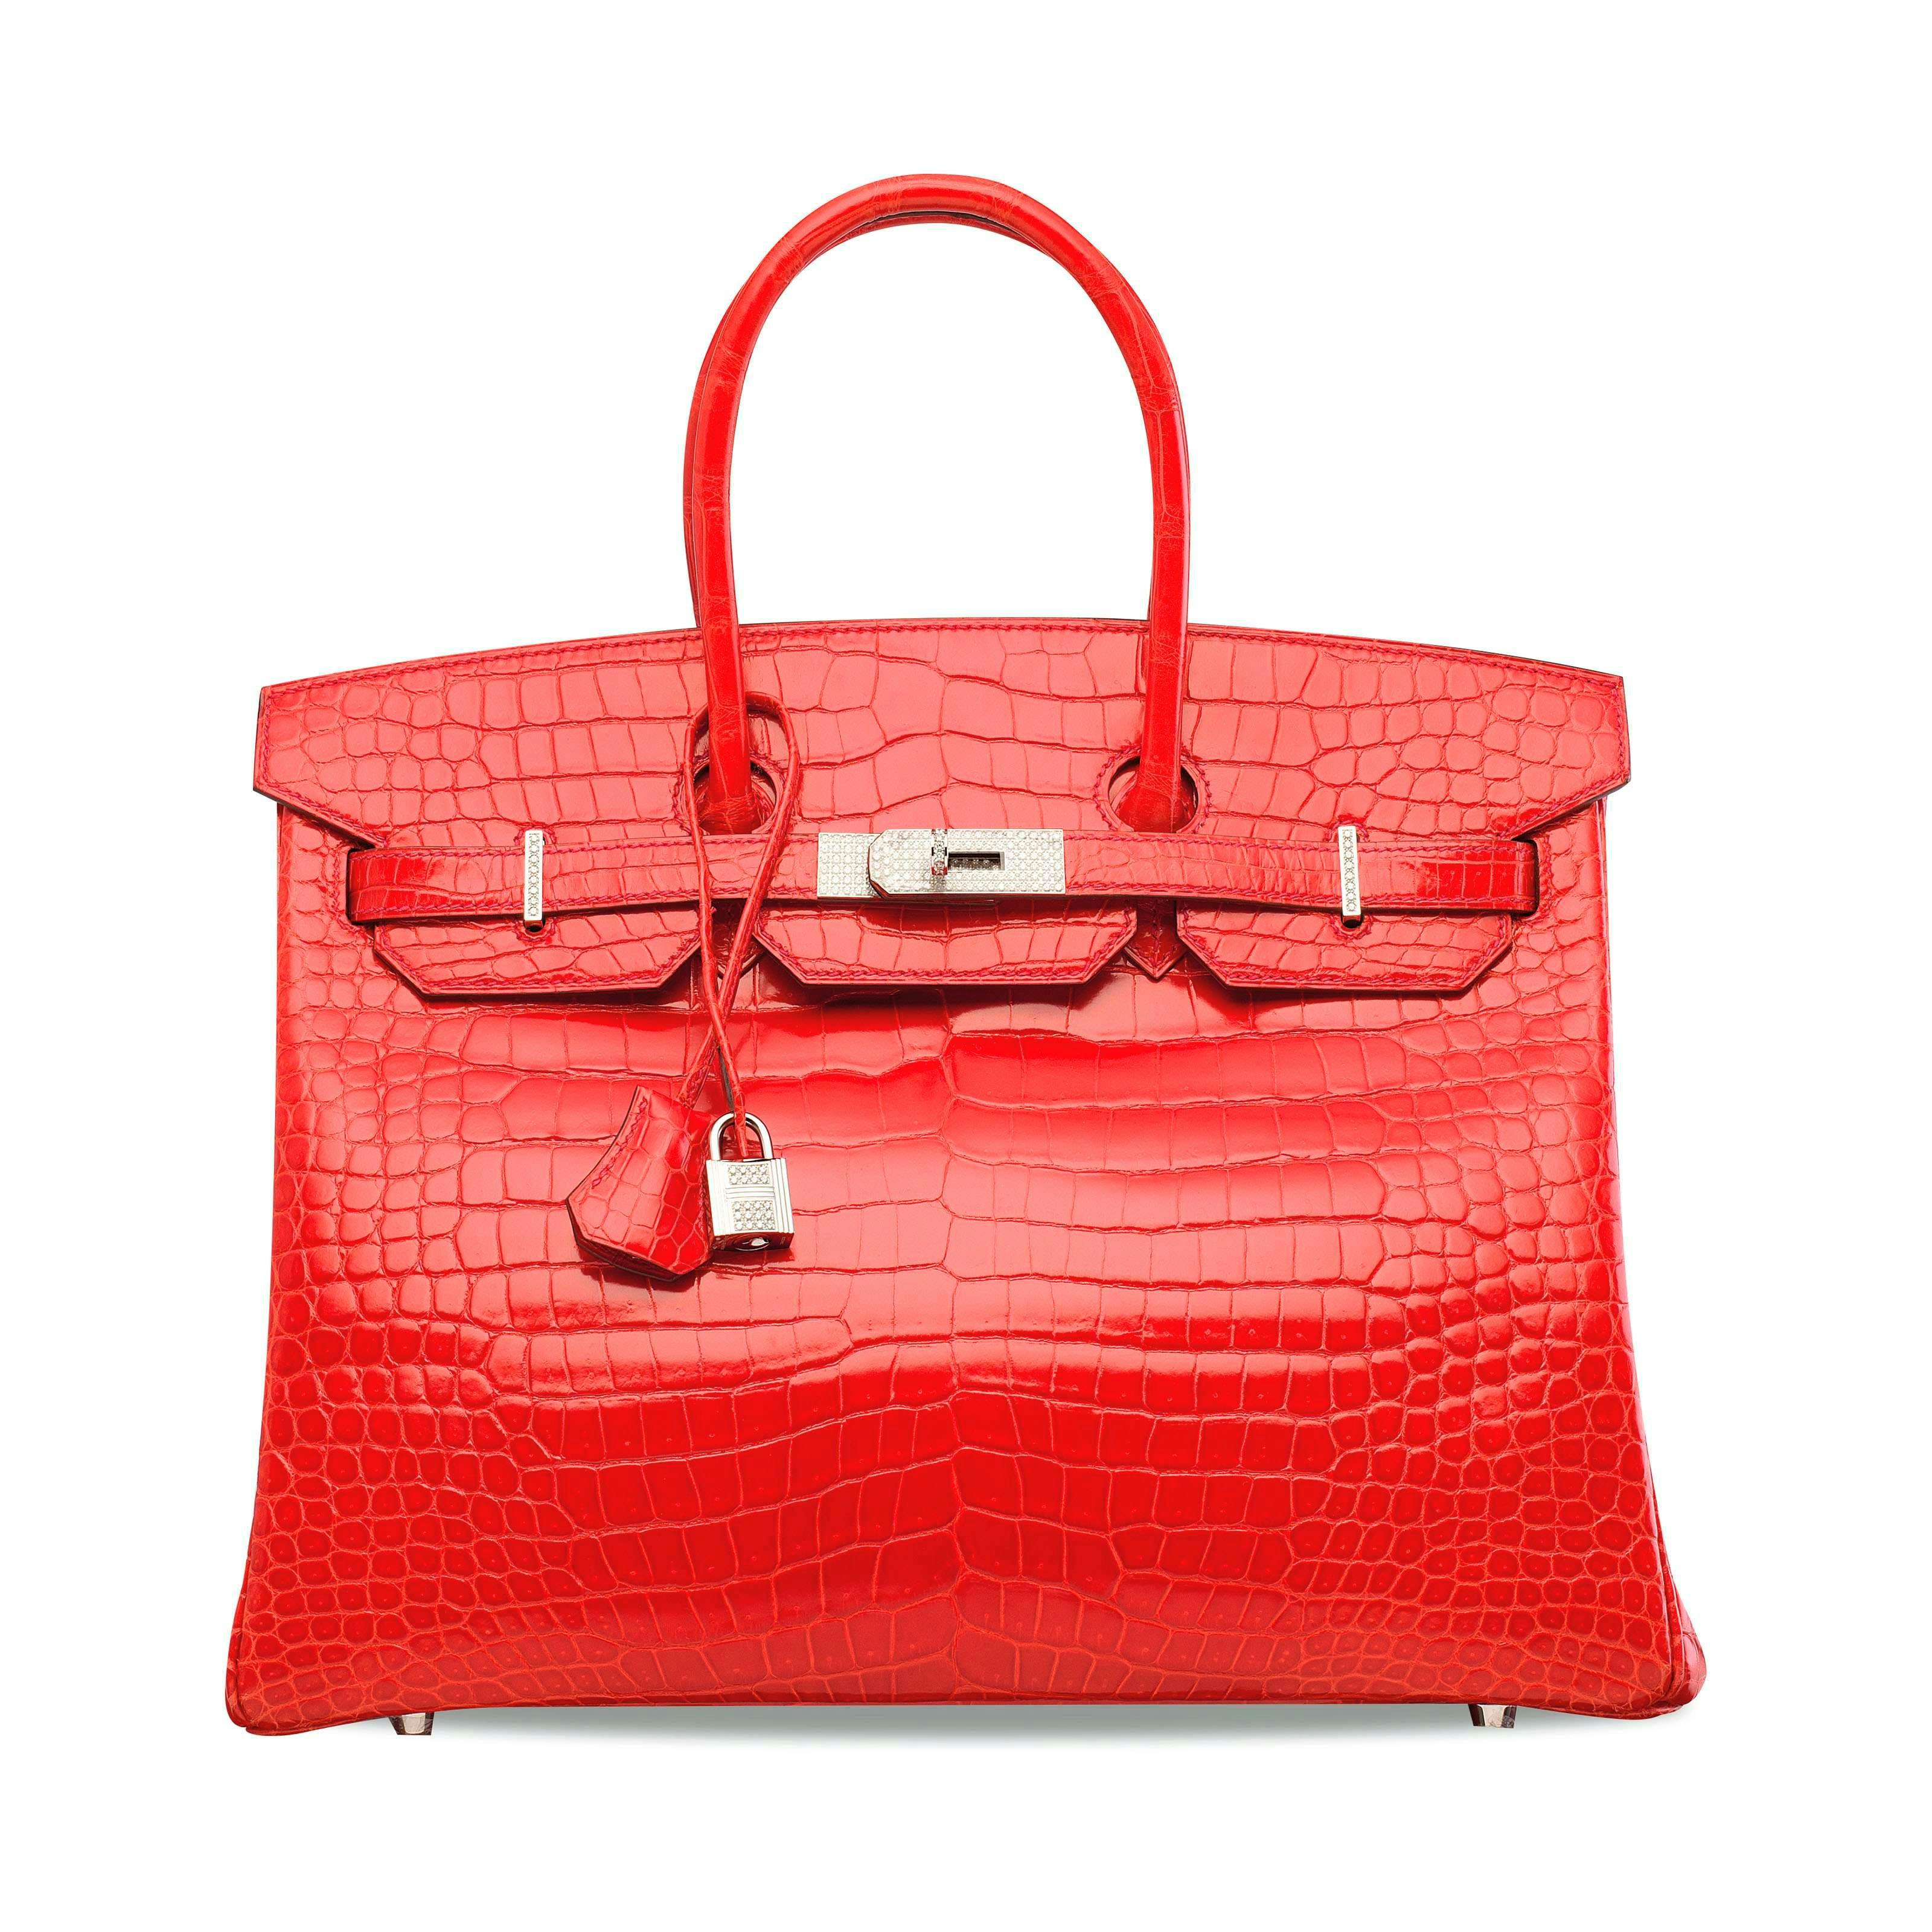 Christie's to Auction Hermés White Crocodile Himalaya Kelly Bag in